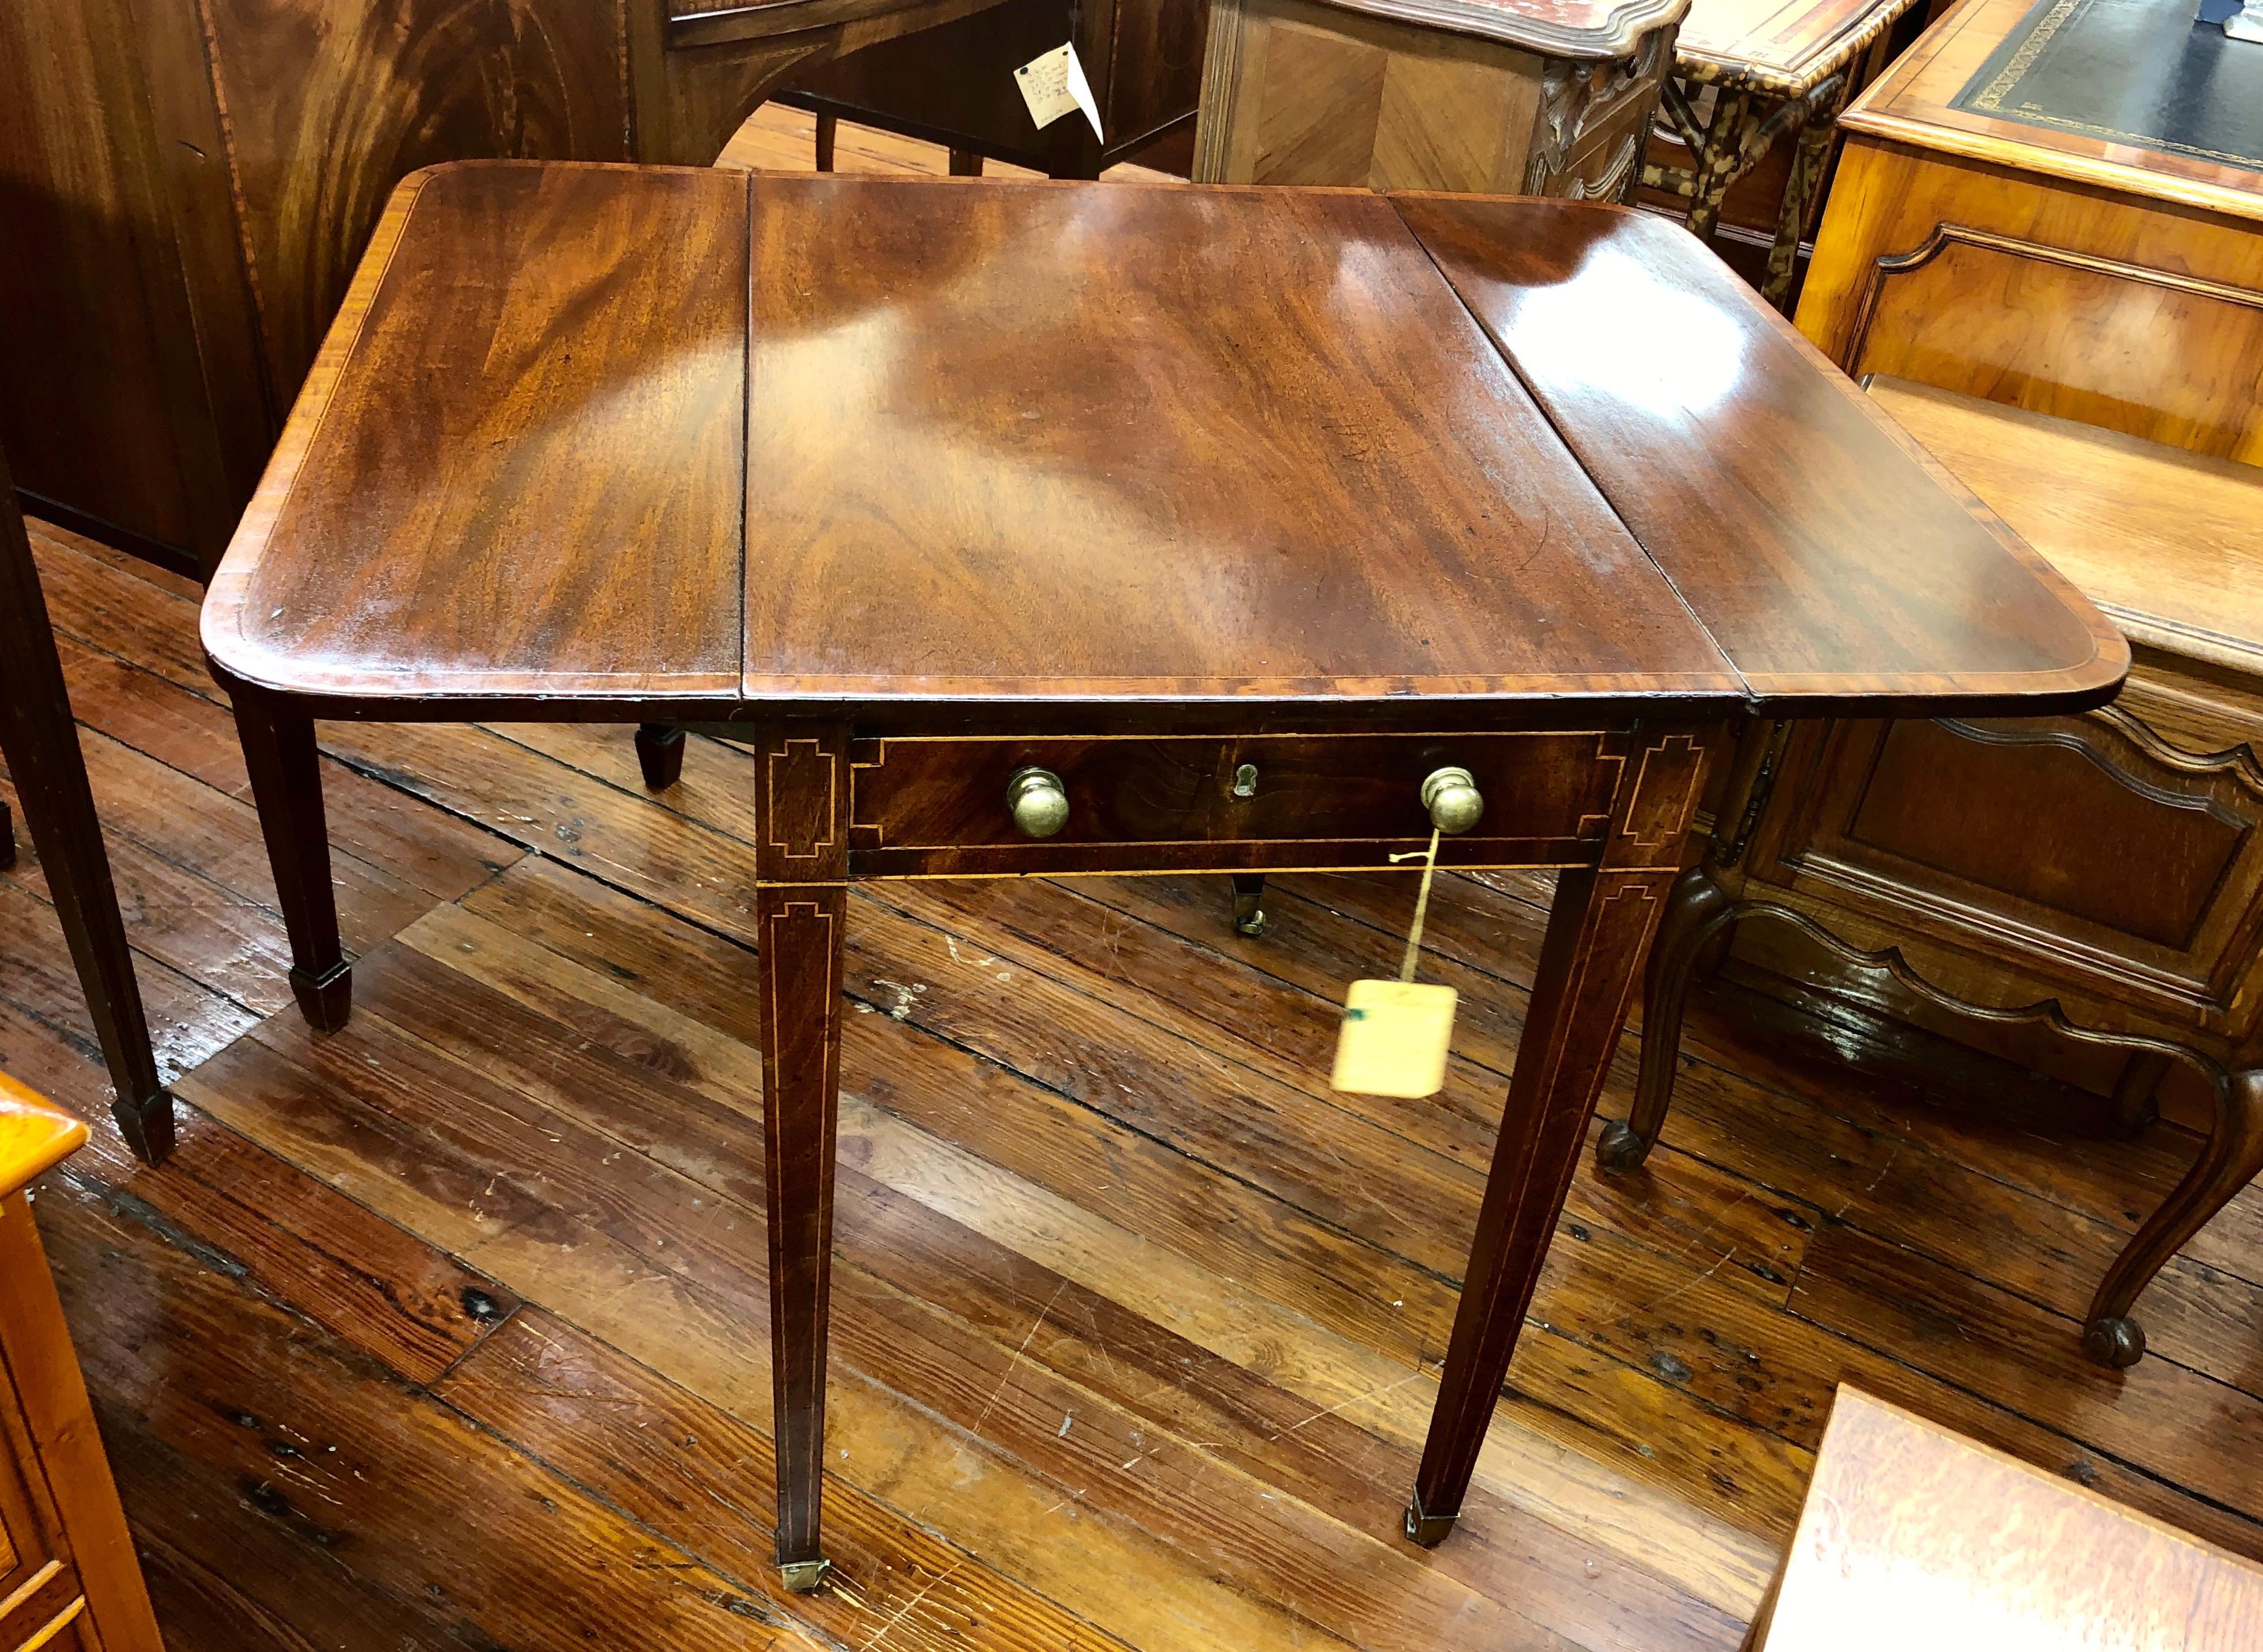 Antique English George III Inlaid mahogany drop-leaf Pembroke table with useful drop leaves. Wonderful as a chair side/sofa side table.

Measures: 20